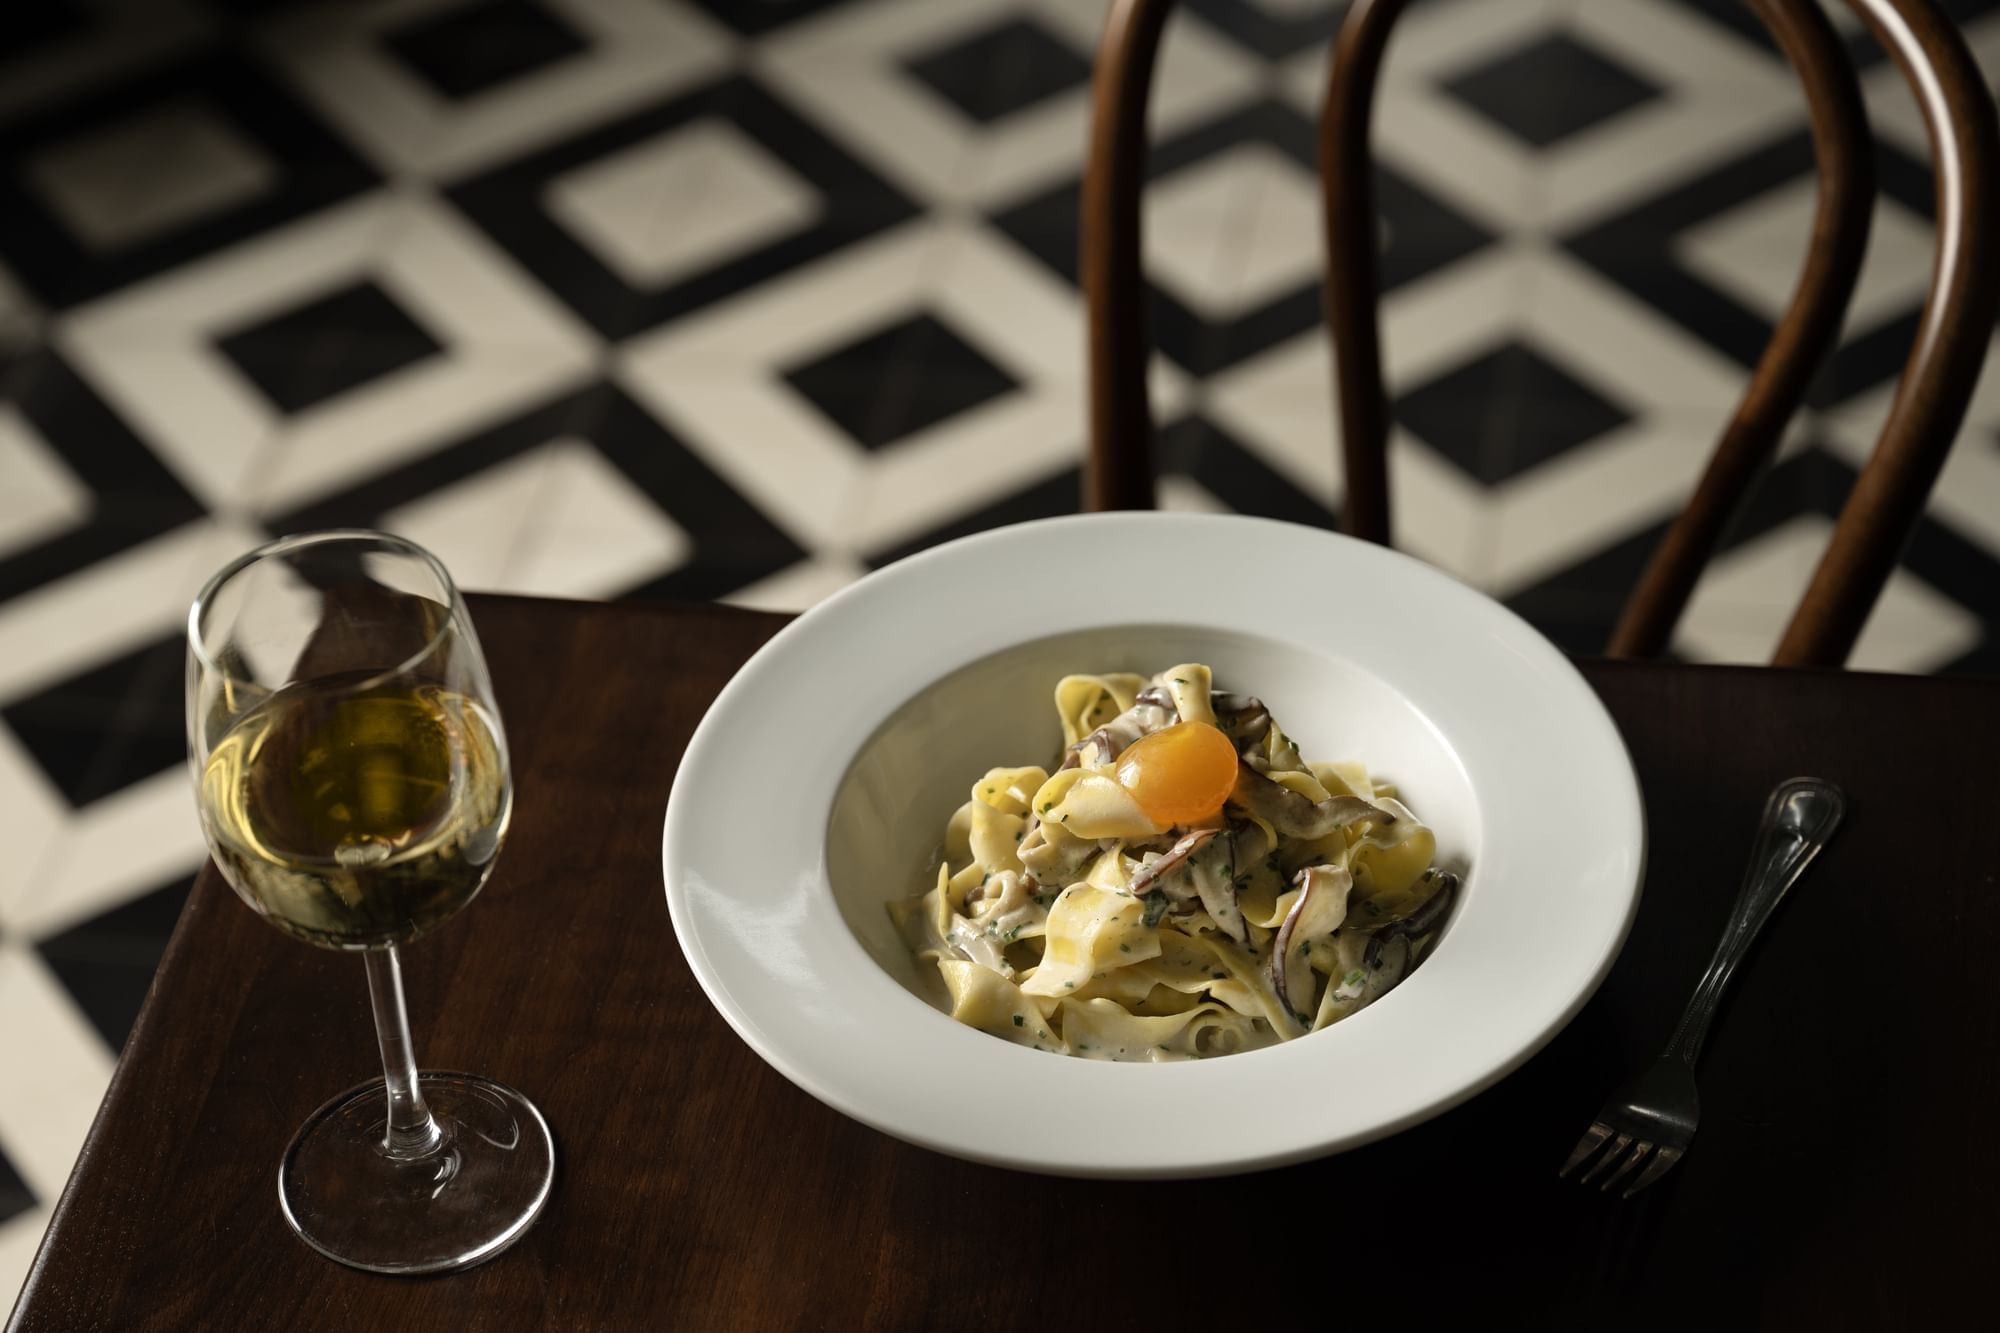 A plate of Coco Miso Pappardelle with shiitake mushroom, lemongrass, cured egg yolk on a table with a wine glass